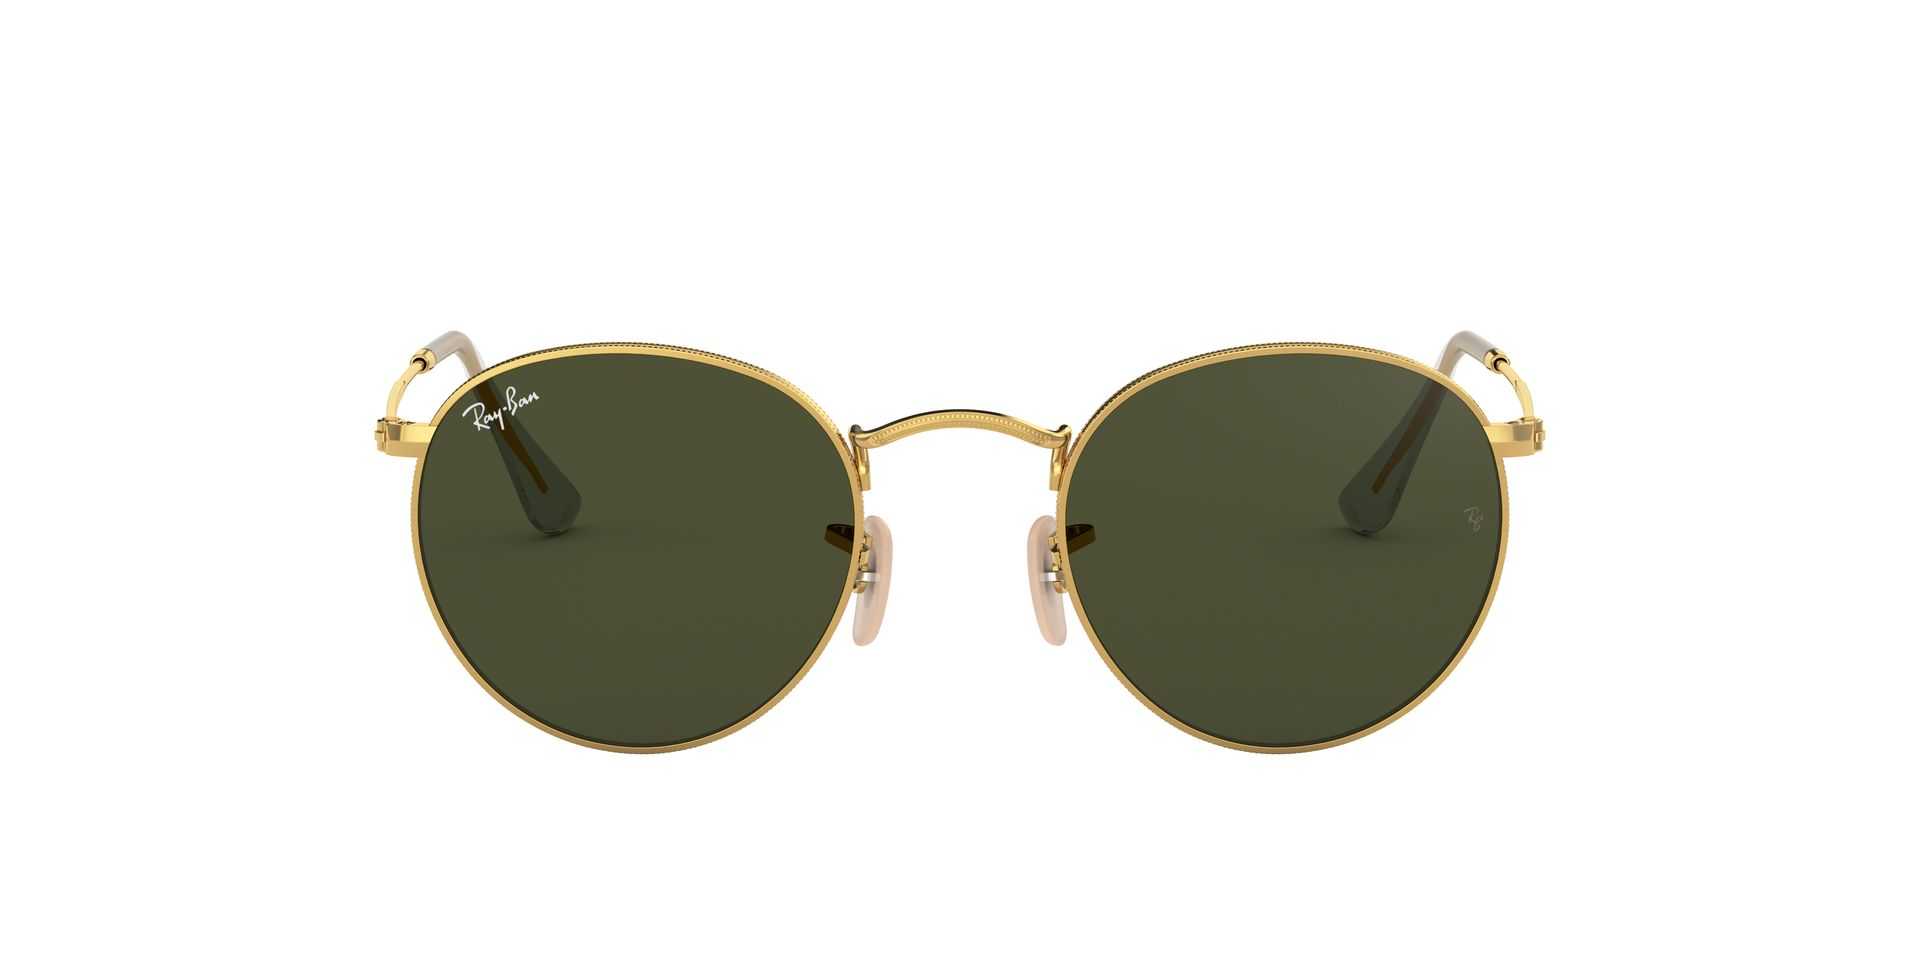 RAY-BAN RB 3447 001 Round Metal 50/21 